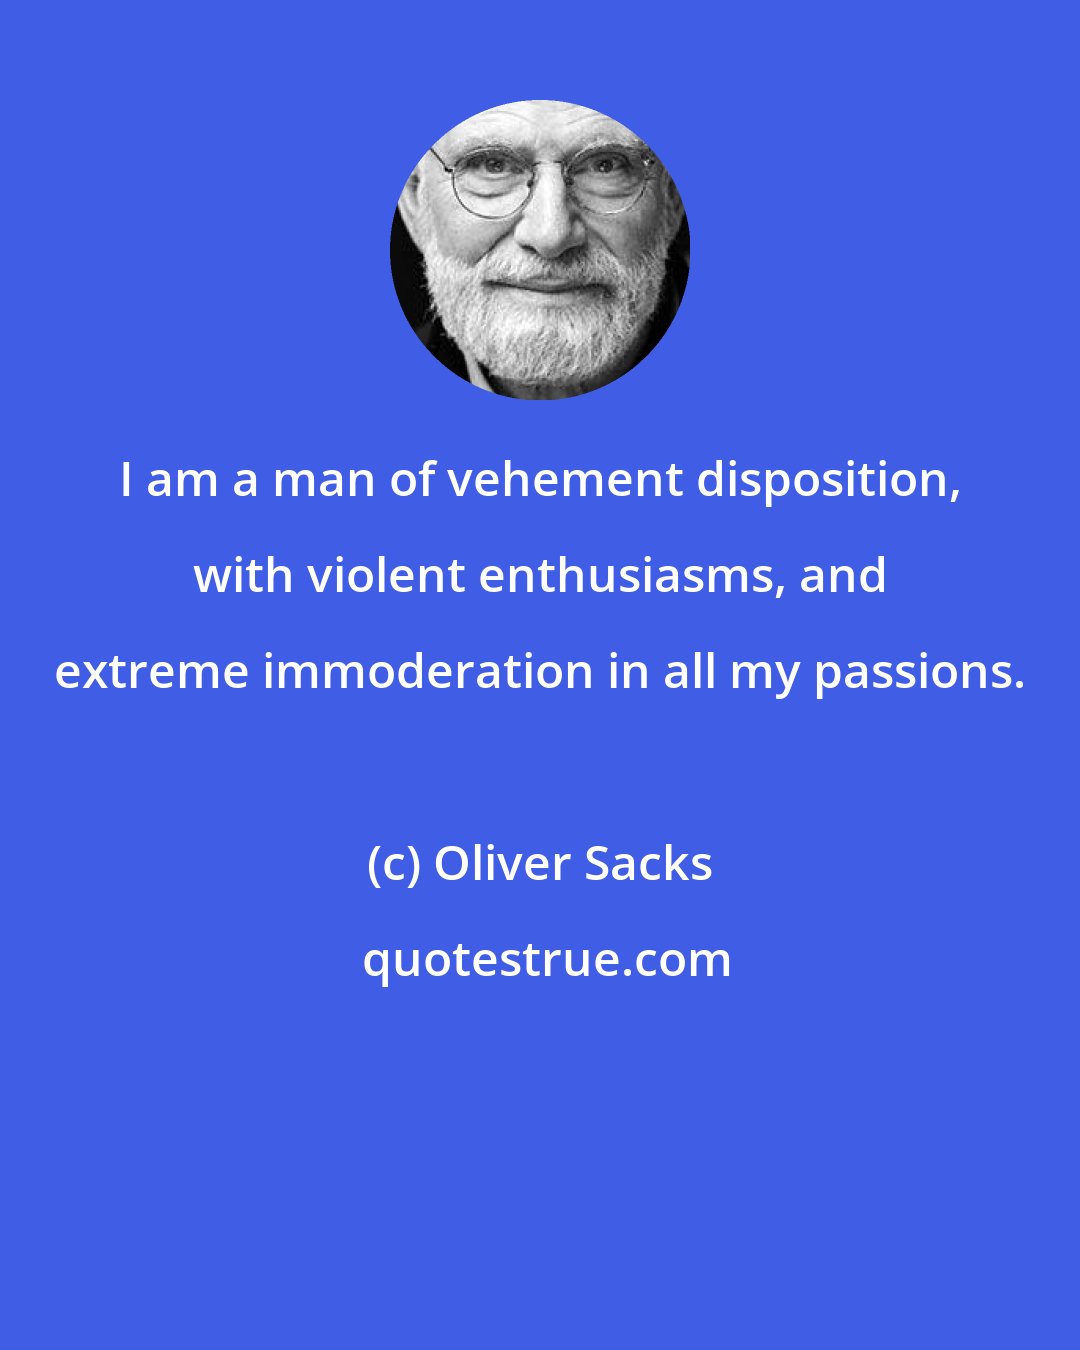 Oliver Sacks: I am a man of vehement disposition, with violent enthusiasms, and extreme immoderation in all my passions.